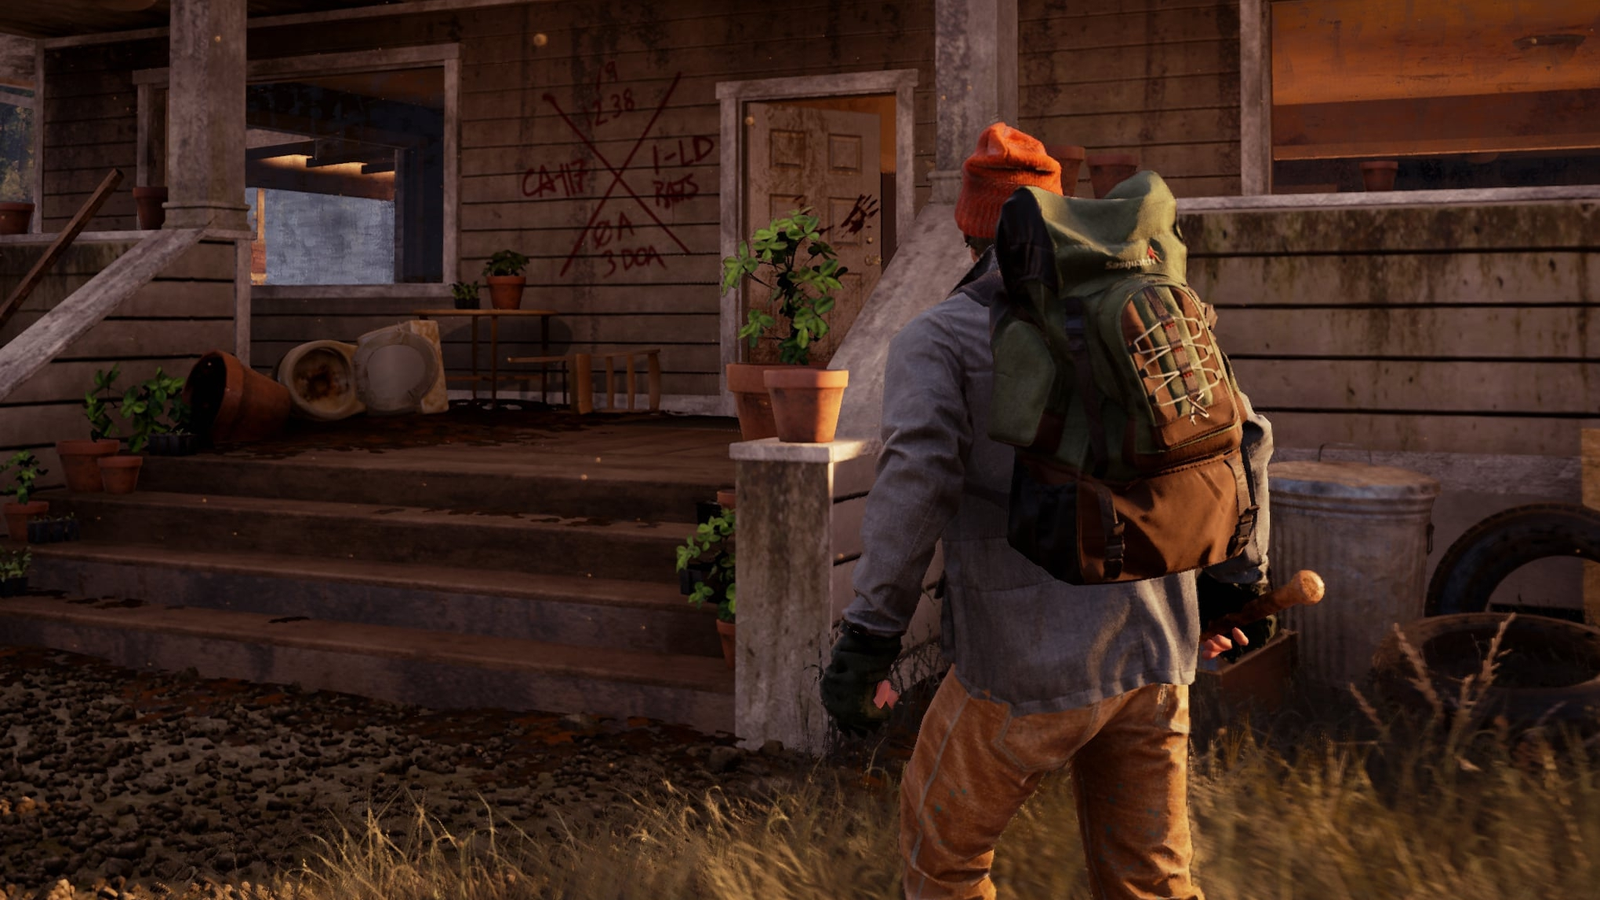 State of Decay 2: 4K co-op gameplay 